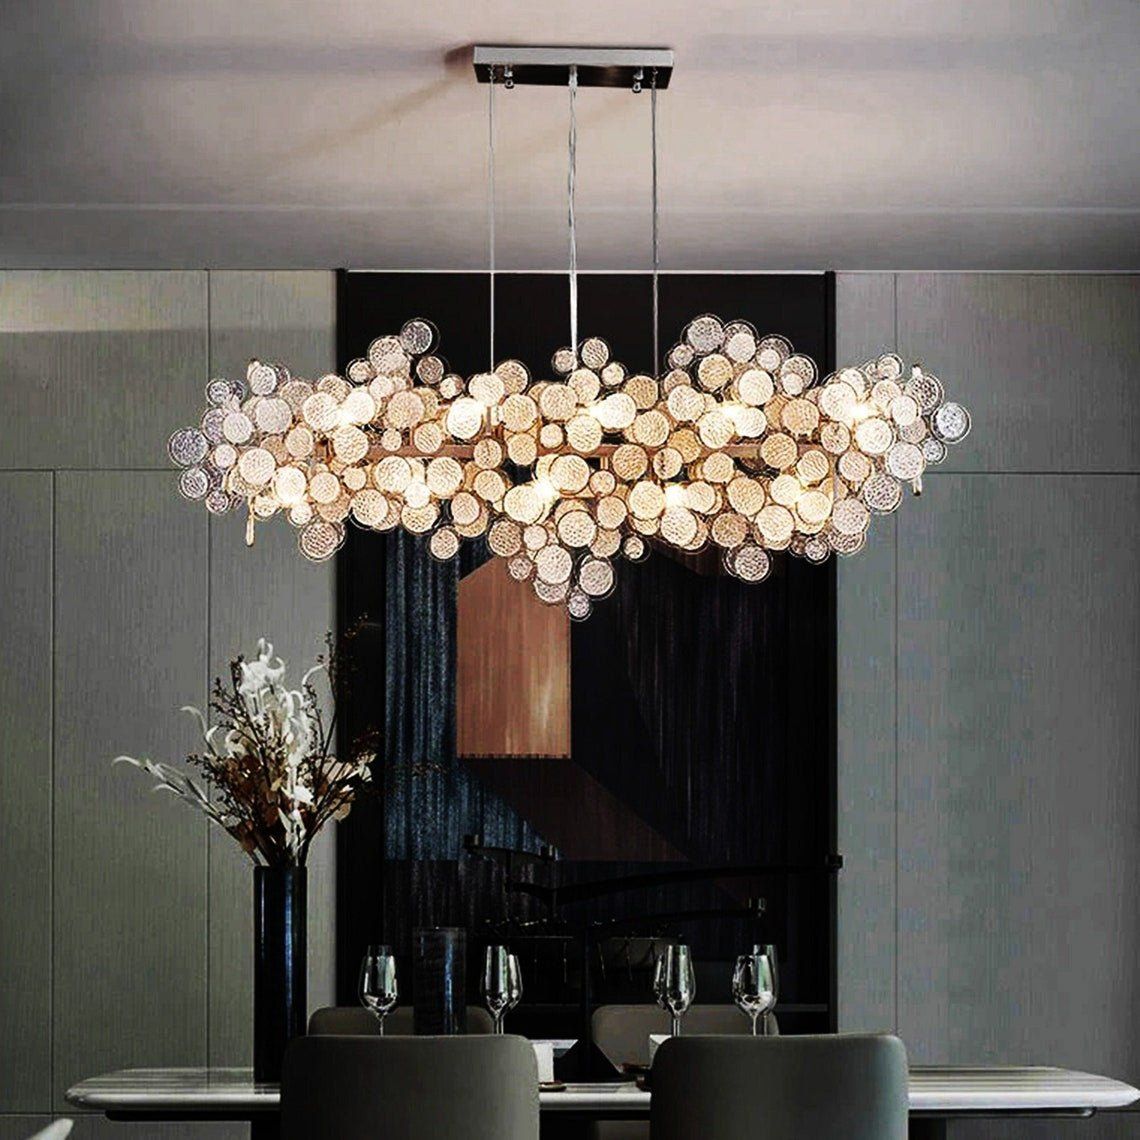 Chandeliers Different Models Explore the Various Styles of Chandeliers Available Today